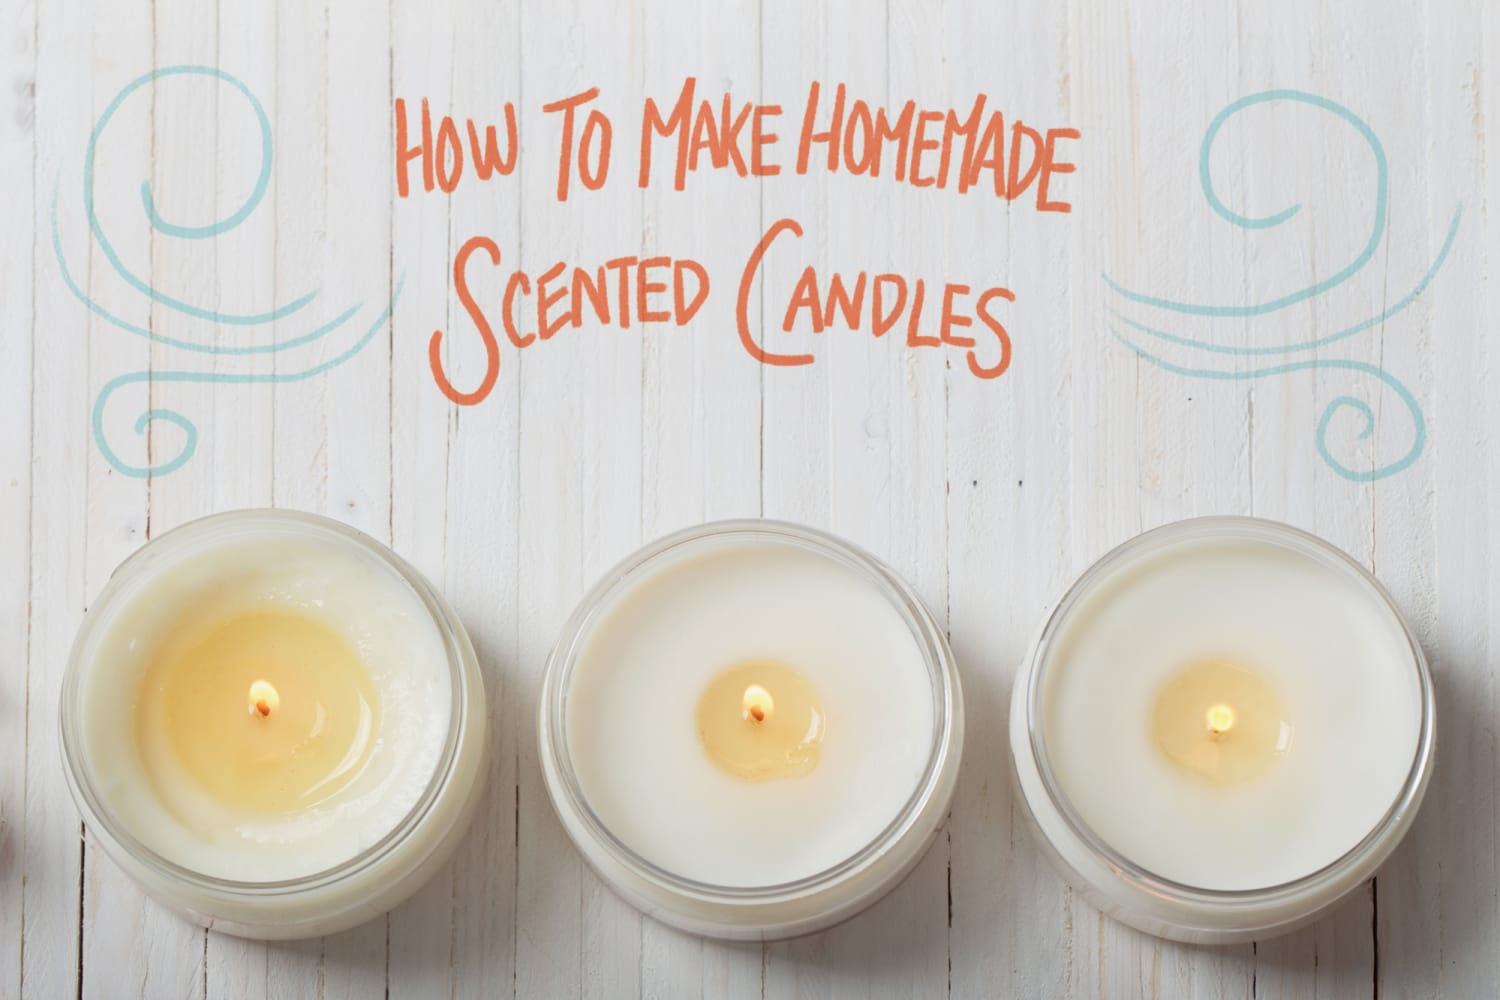 How to Make Soy Candles: A Beginner's Guide  Diy candles scented, Candle  scents recipes, Making candles diy